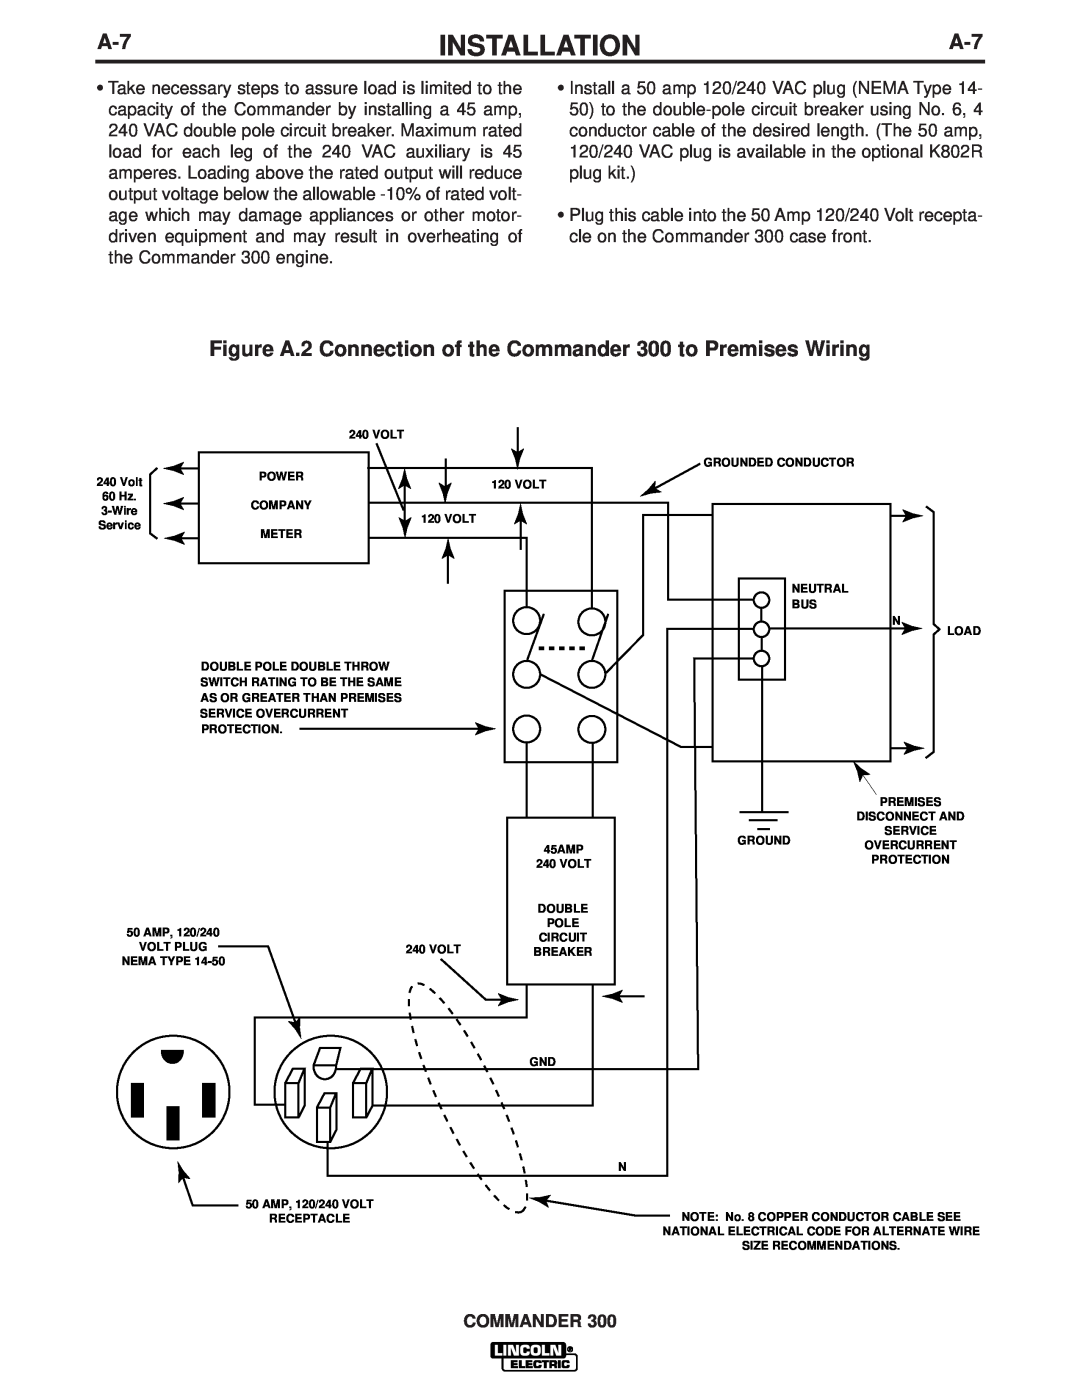 Lincoln Electric IM700-D manual Figure A.2 Connection of the Commander 300 to Premises Wiring, Installation 